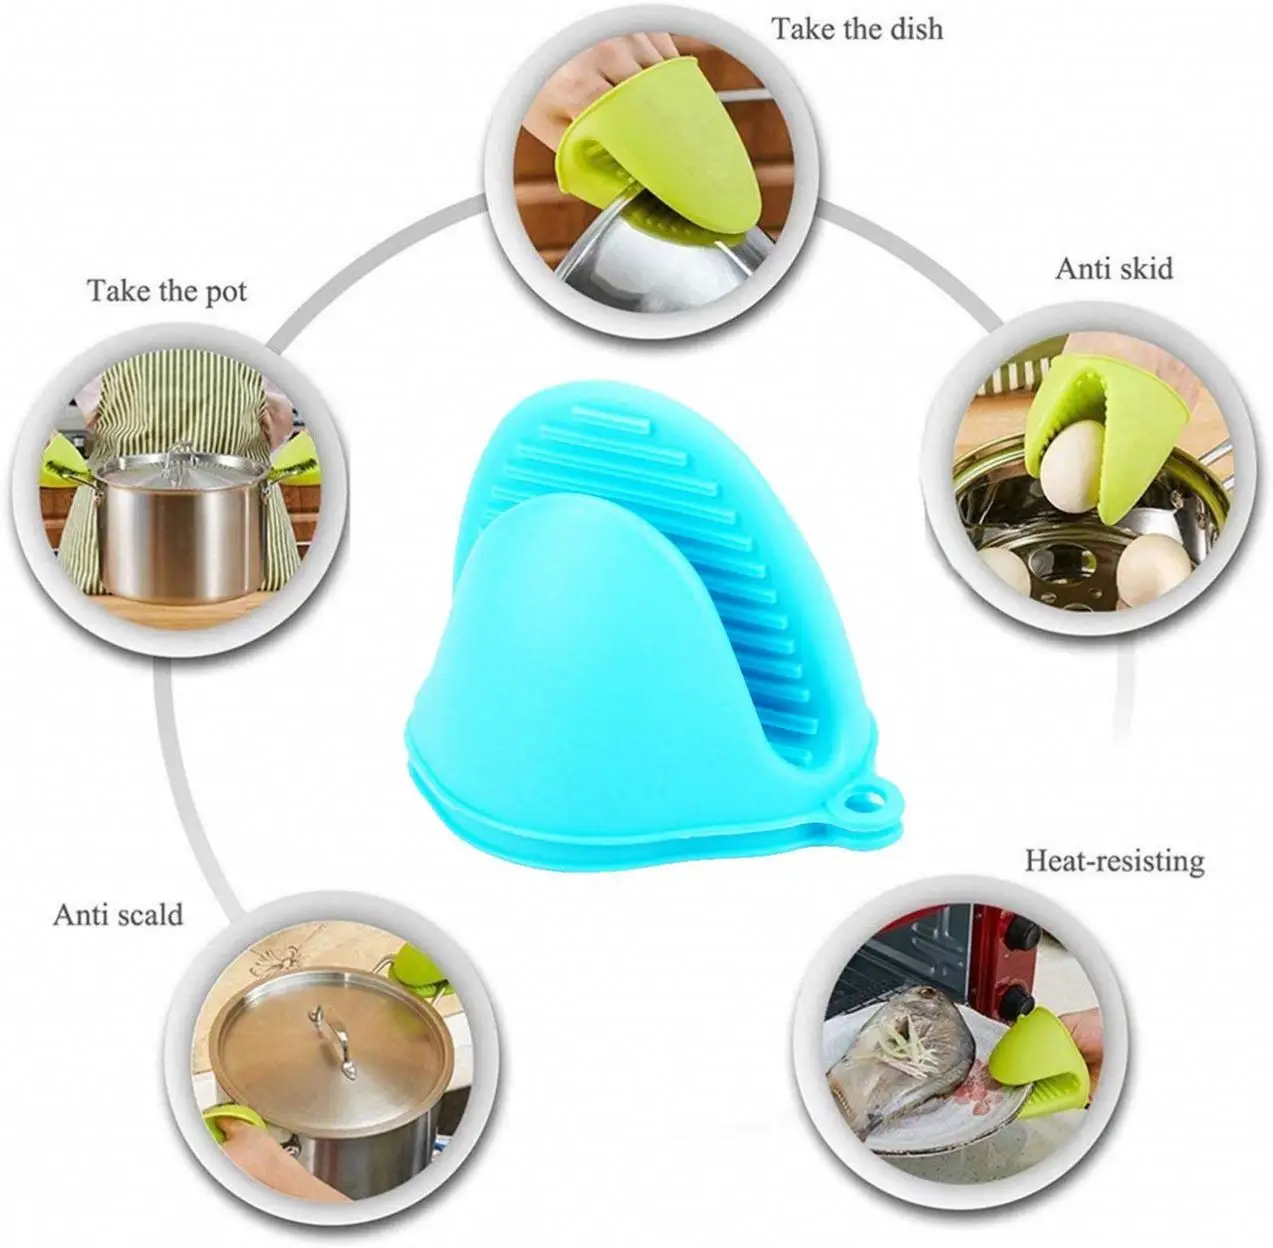 

Mini Oven Mitt Silicone Pot Holder Cooking Finger Protector Pinch Grips Heat Resistant for Kitchen Cooking Baking